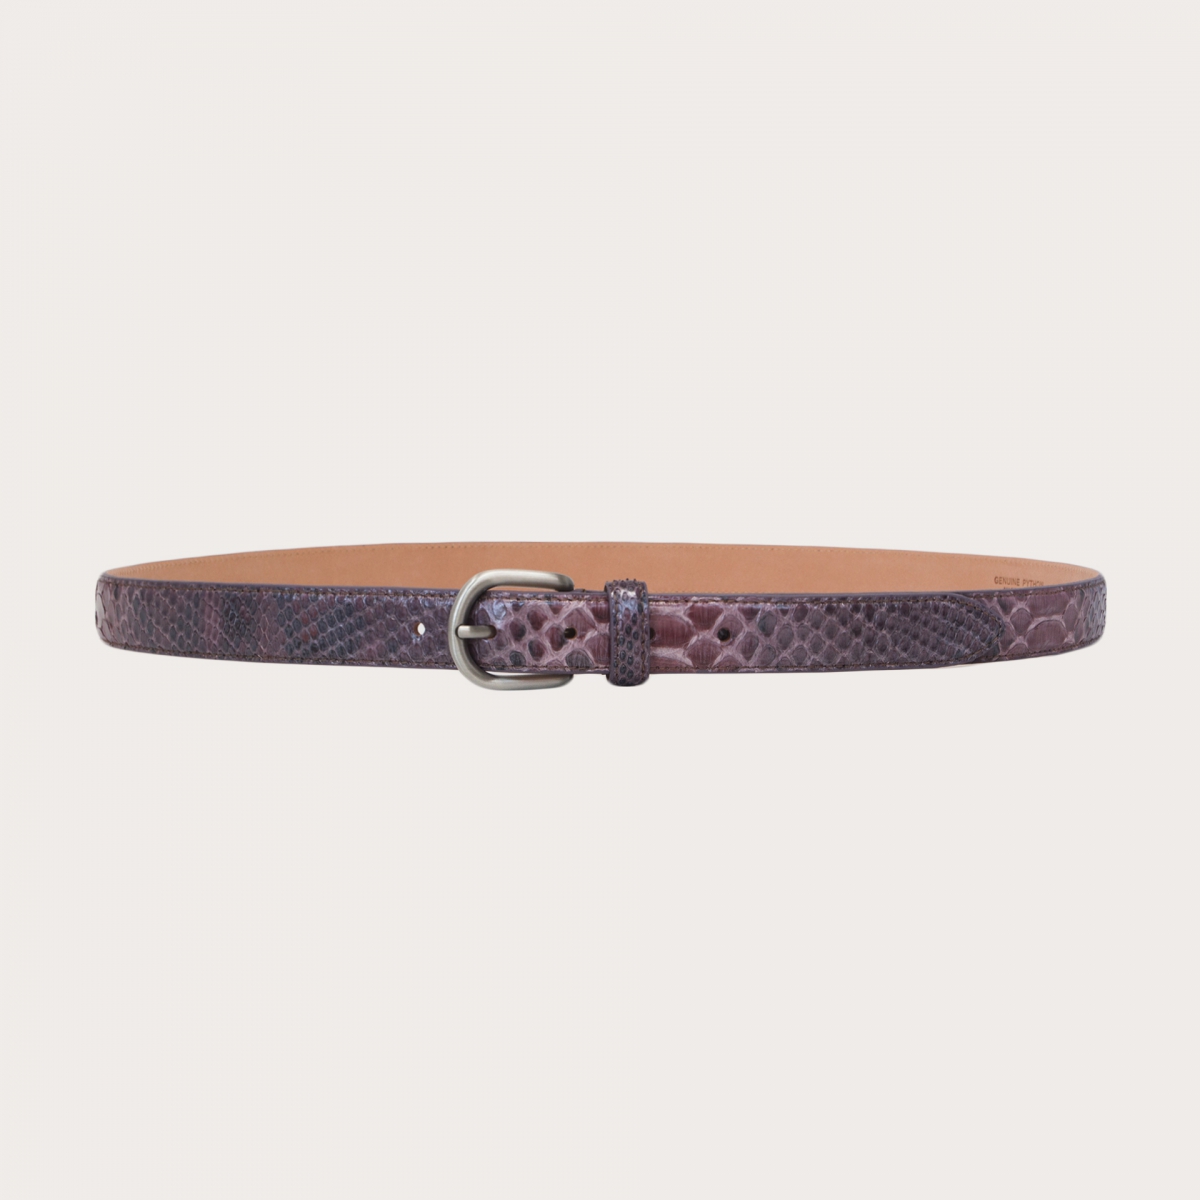 BRUCLE Thin belt in shiny python with nickel free satin buckle, powder color